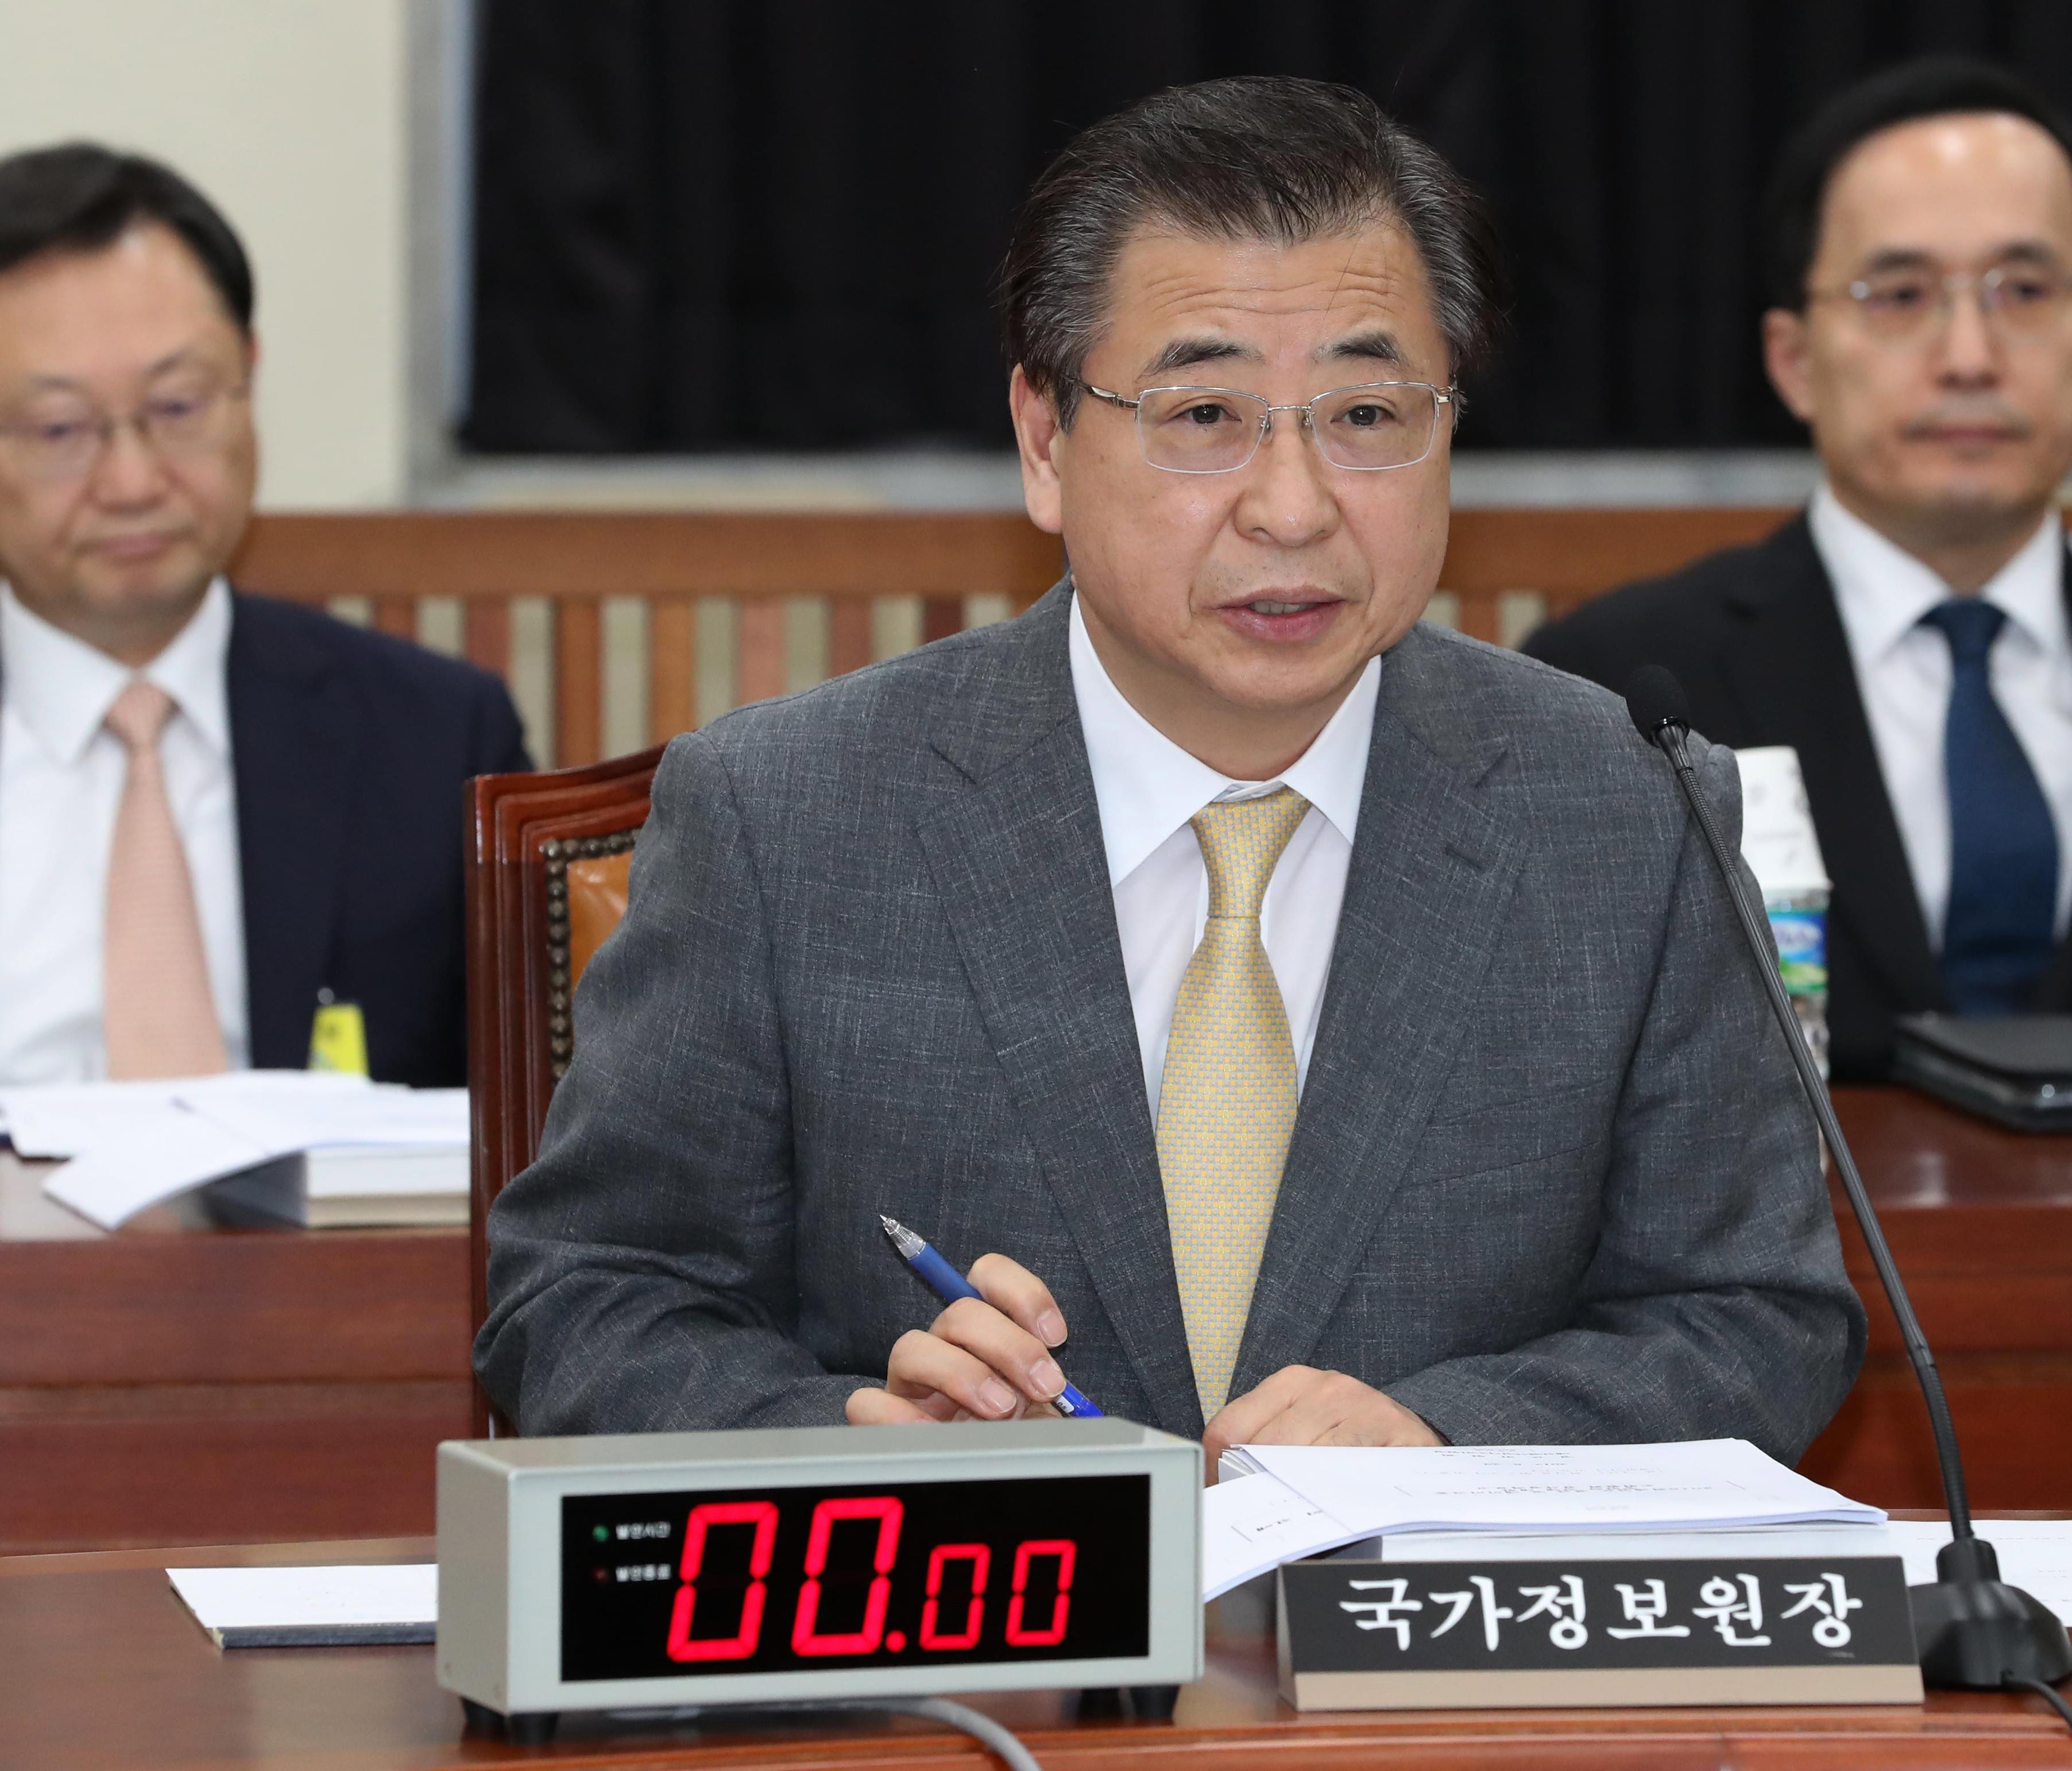 Suh Hoon, director of South Korea's National Intelligence Service (NIS), gives a briefing on North Korea's latest intermediate ballistic missile launch at the National Assembly's intelligence committee in Seoul, South Korea, Aug. 29, 2017.